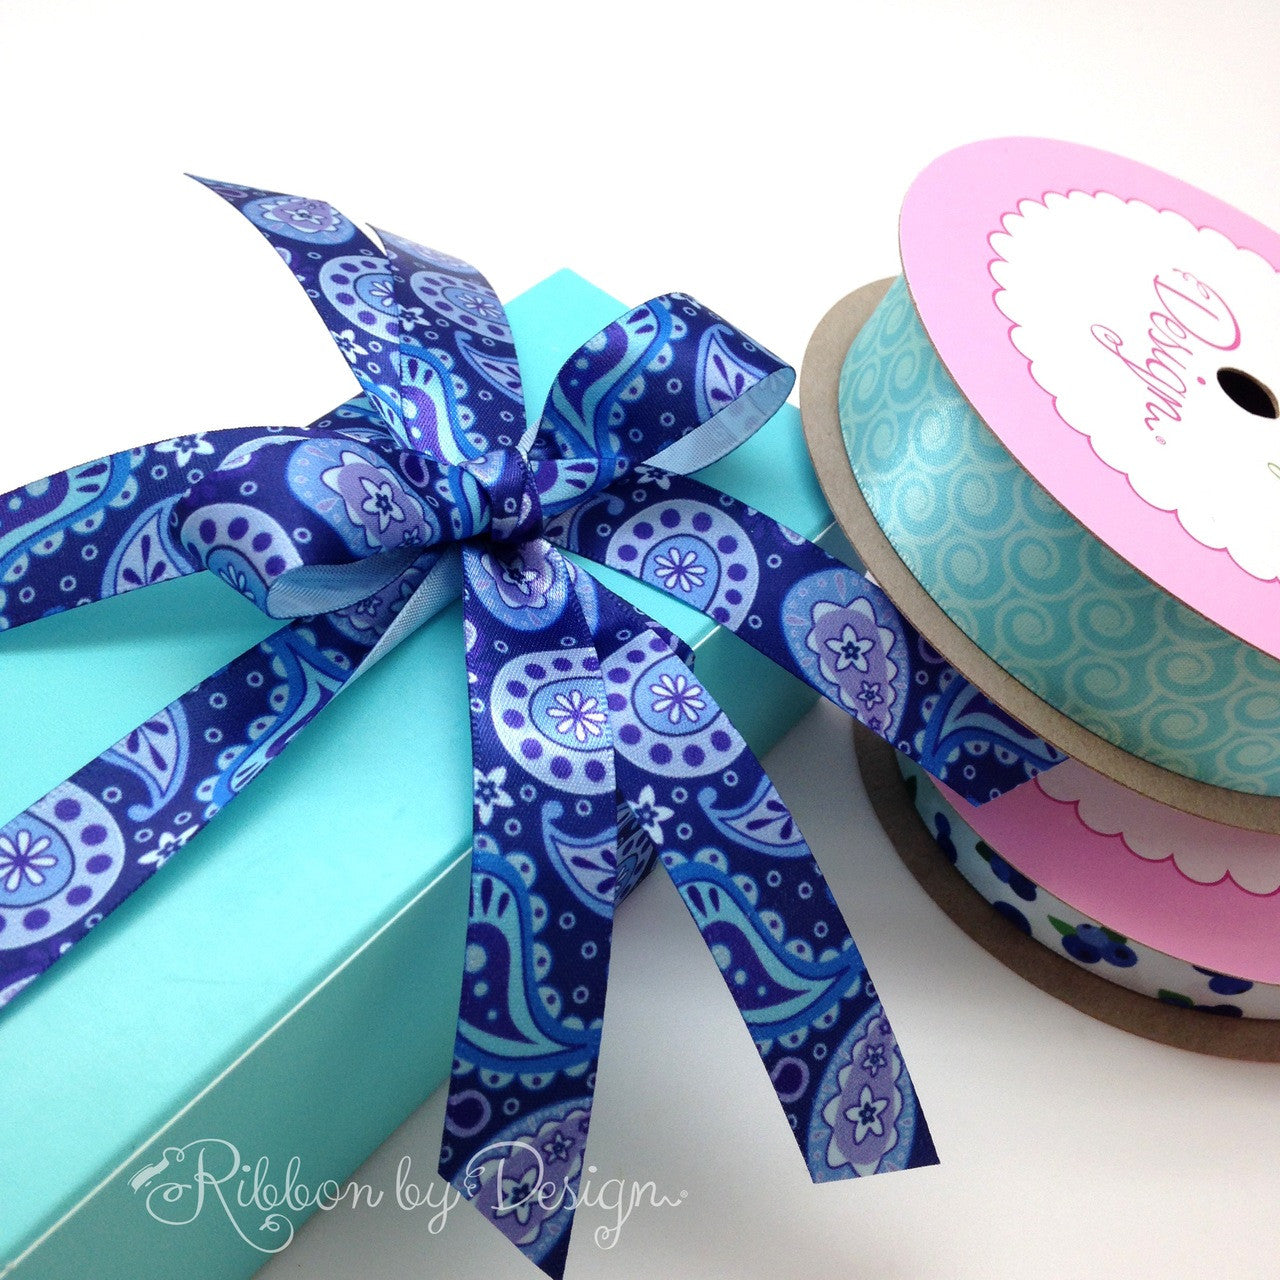 Our paisley ribbon added to this aqua box will create an interesting mix of blues for a great gift!